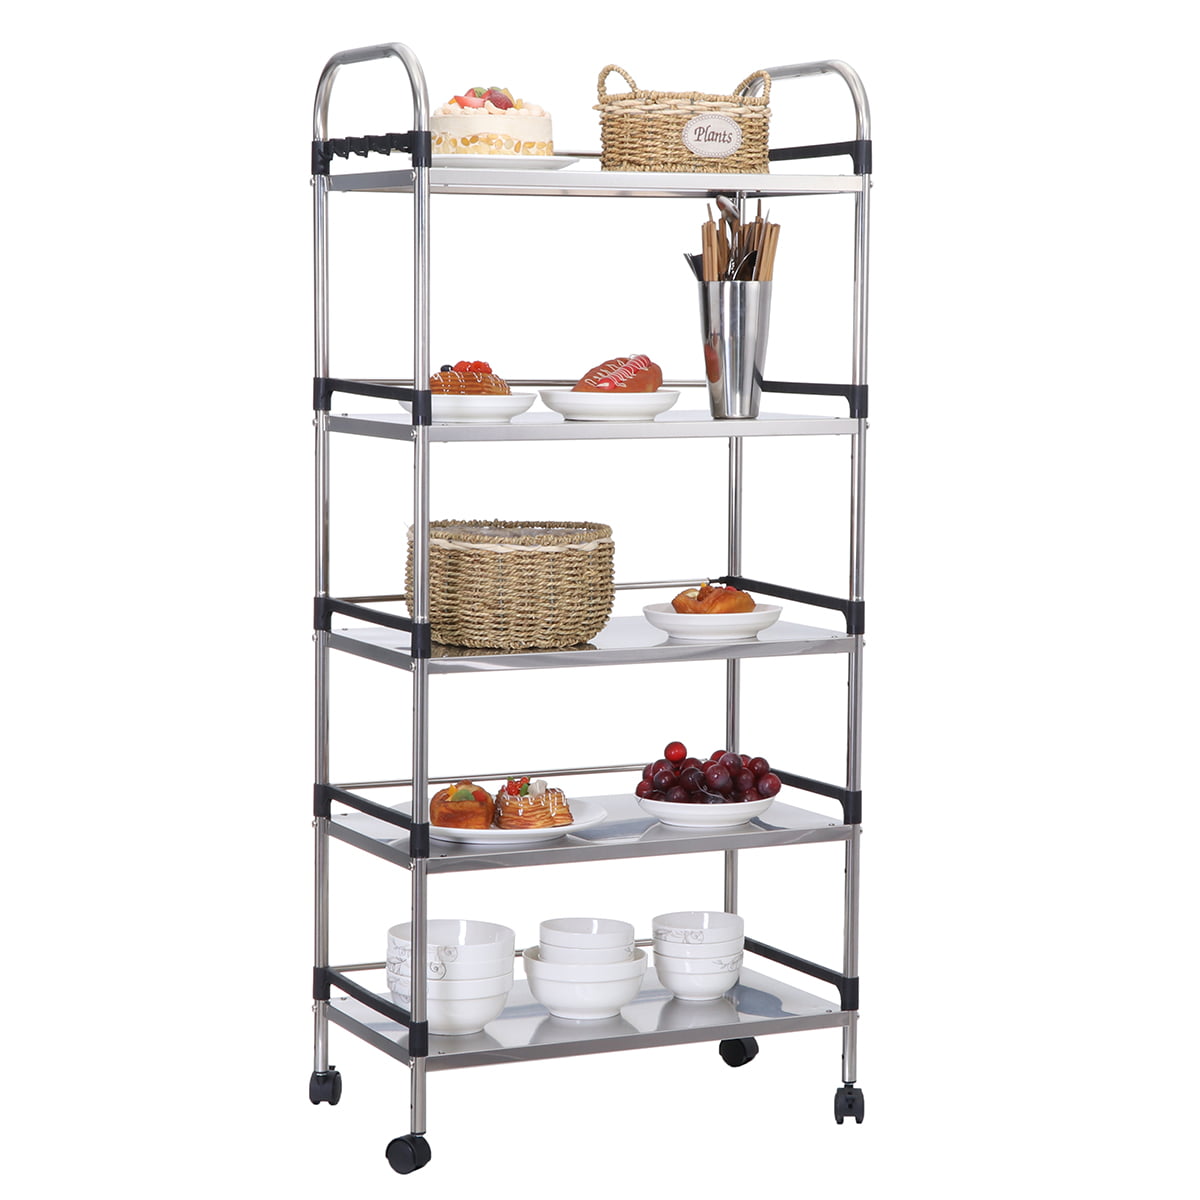 Thicken Stainless 52" H Shelving Unit 5-Tier with Wheels Kitchen Bakers Stainless Steel Shelving On Wheels